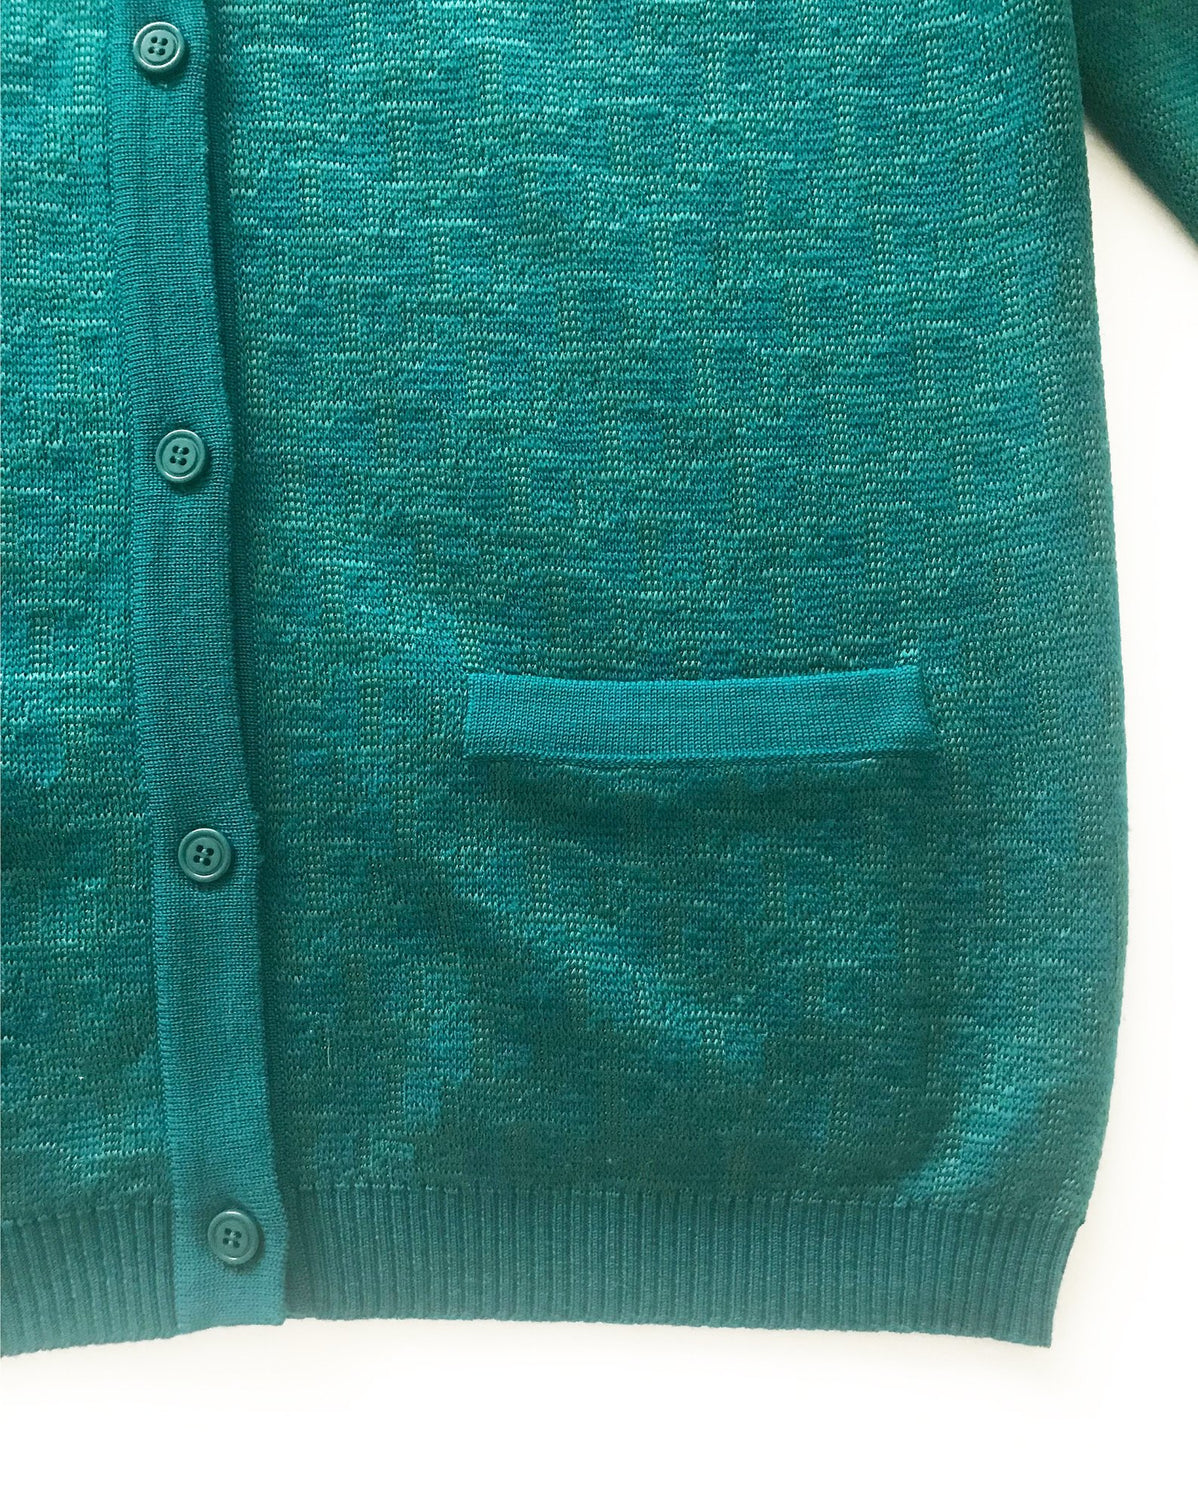 Fruit Vintage Christian Dior Christian Dior logo trotter knit cardigan in vibrant green. Features a classic cardigan cut with front pockets and button up closure.